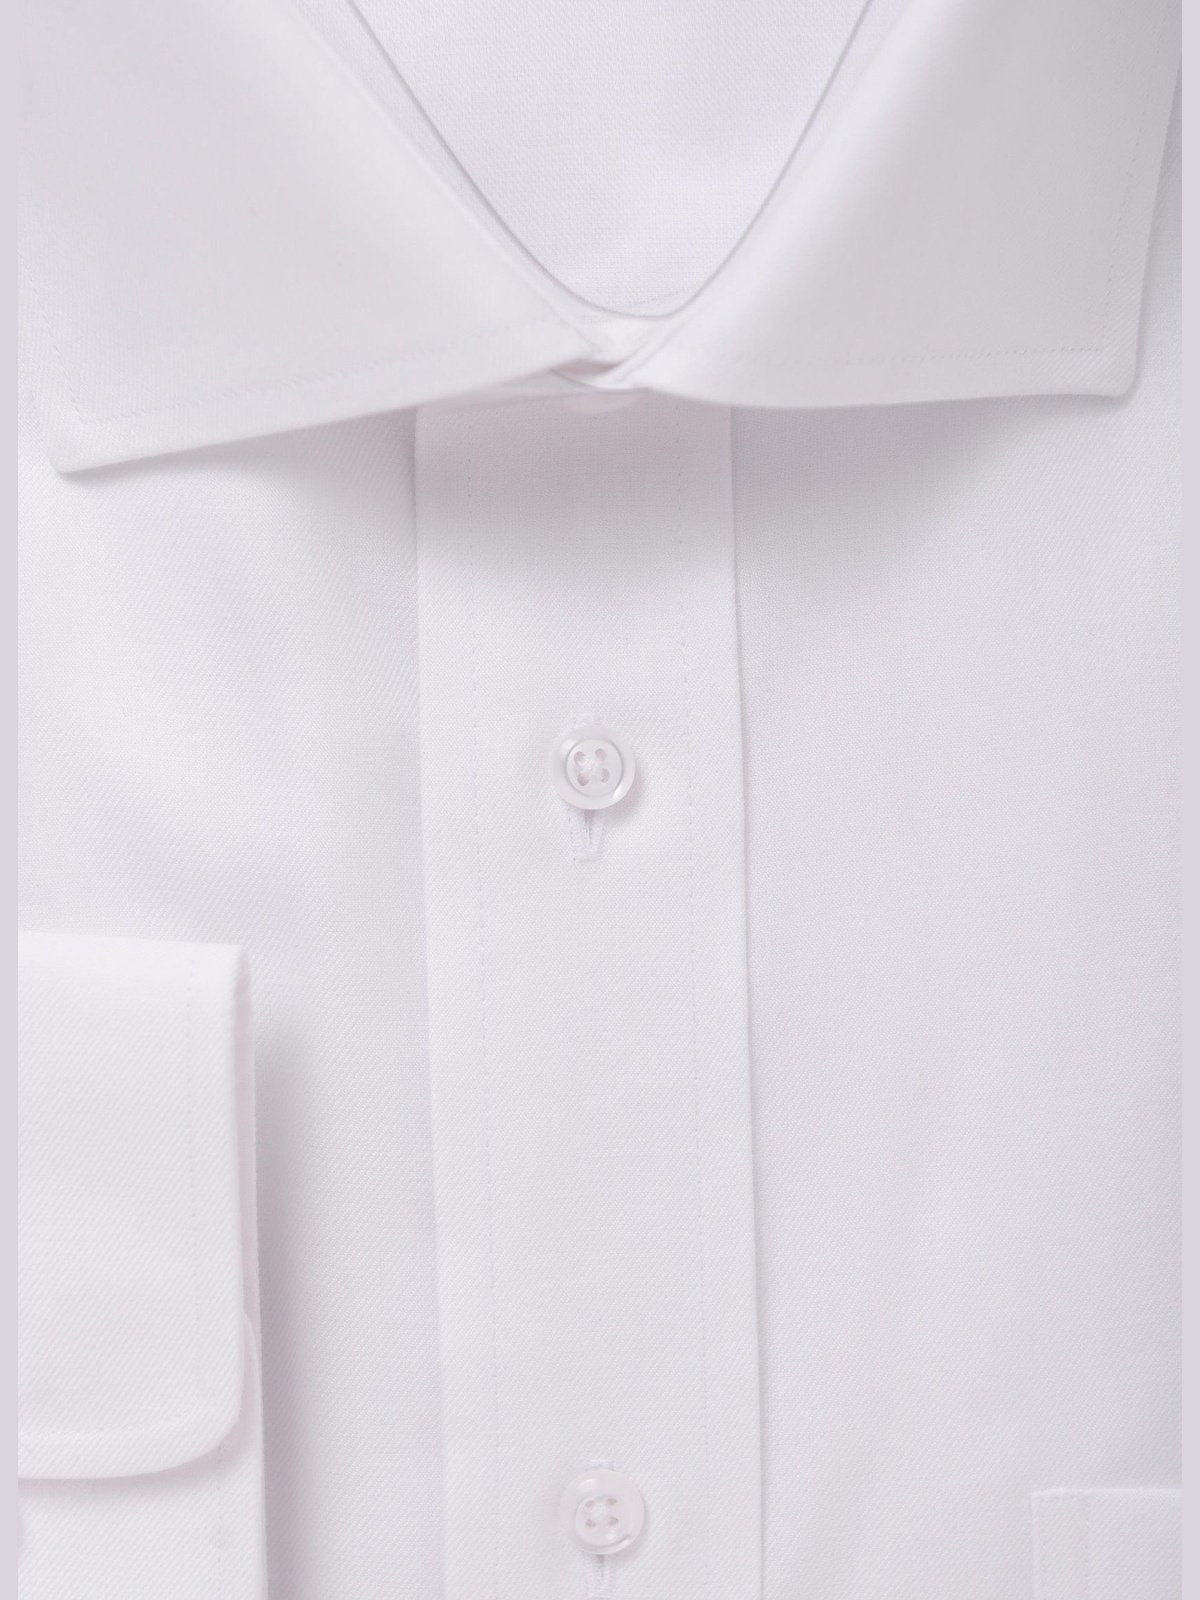 Christopher Morris Bestselling Items Christopher Morris Mens 100% Cotton Solid White Non-Iron Classic Fit Dress Shirt